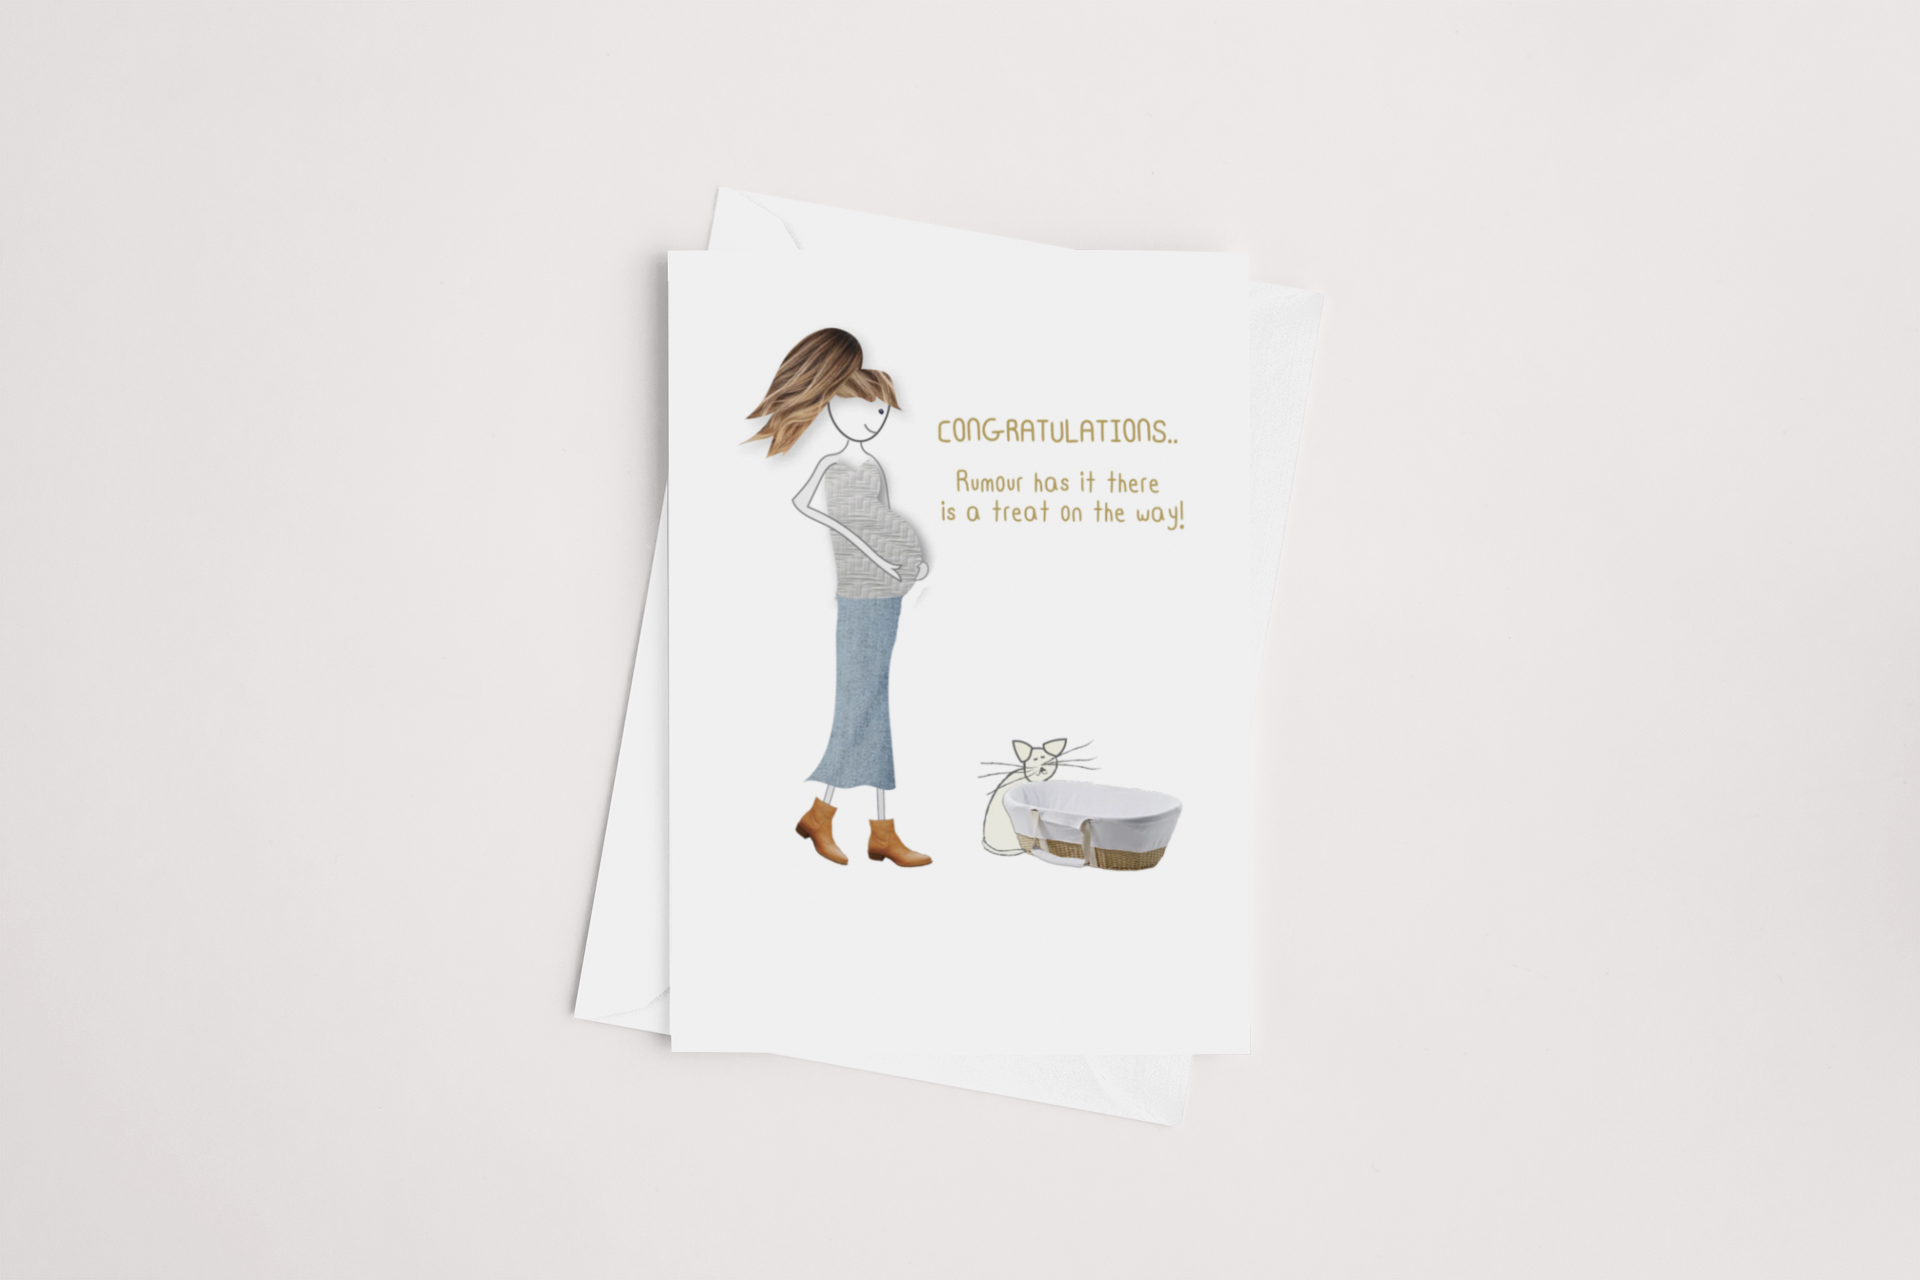 A congratulatory Rumour Has It card, a product of icandy, featuring an illustration of a pregnant woman with a text that reads "congratulations" and a playful message saying "rumor has it